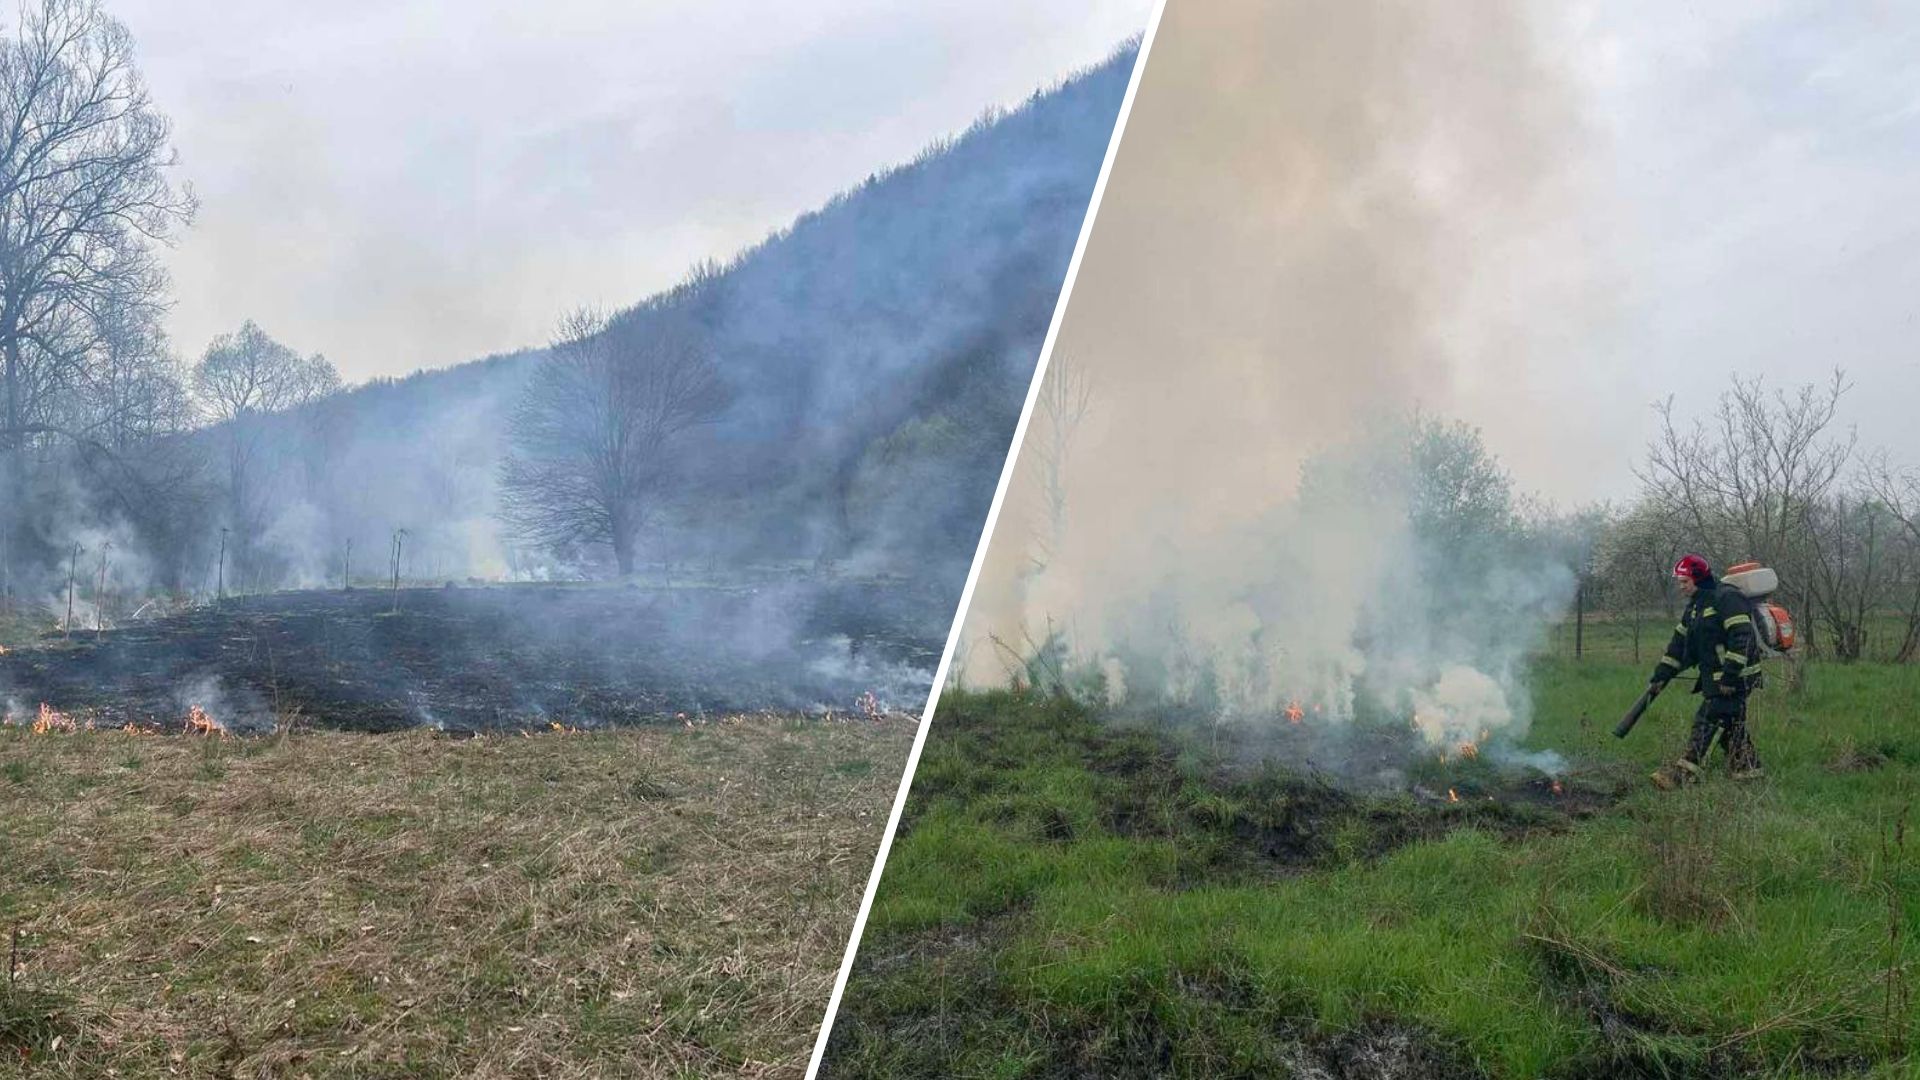 Transcarpathians continue to burn dry grass and garbage at an accelerated pace, despite a short break due to weather conditions.